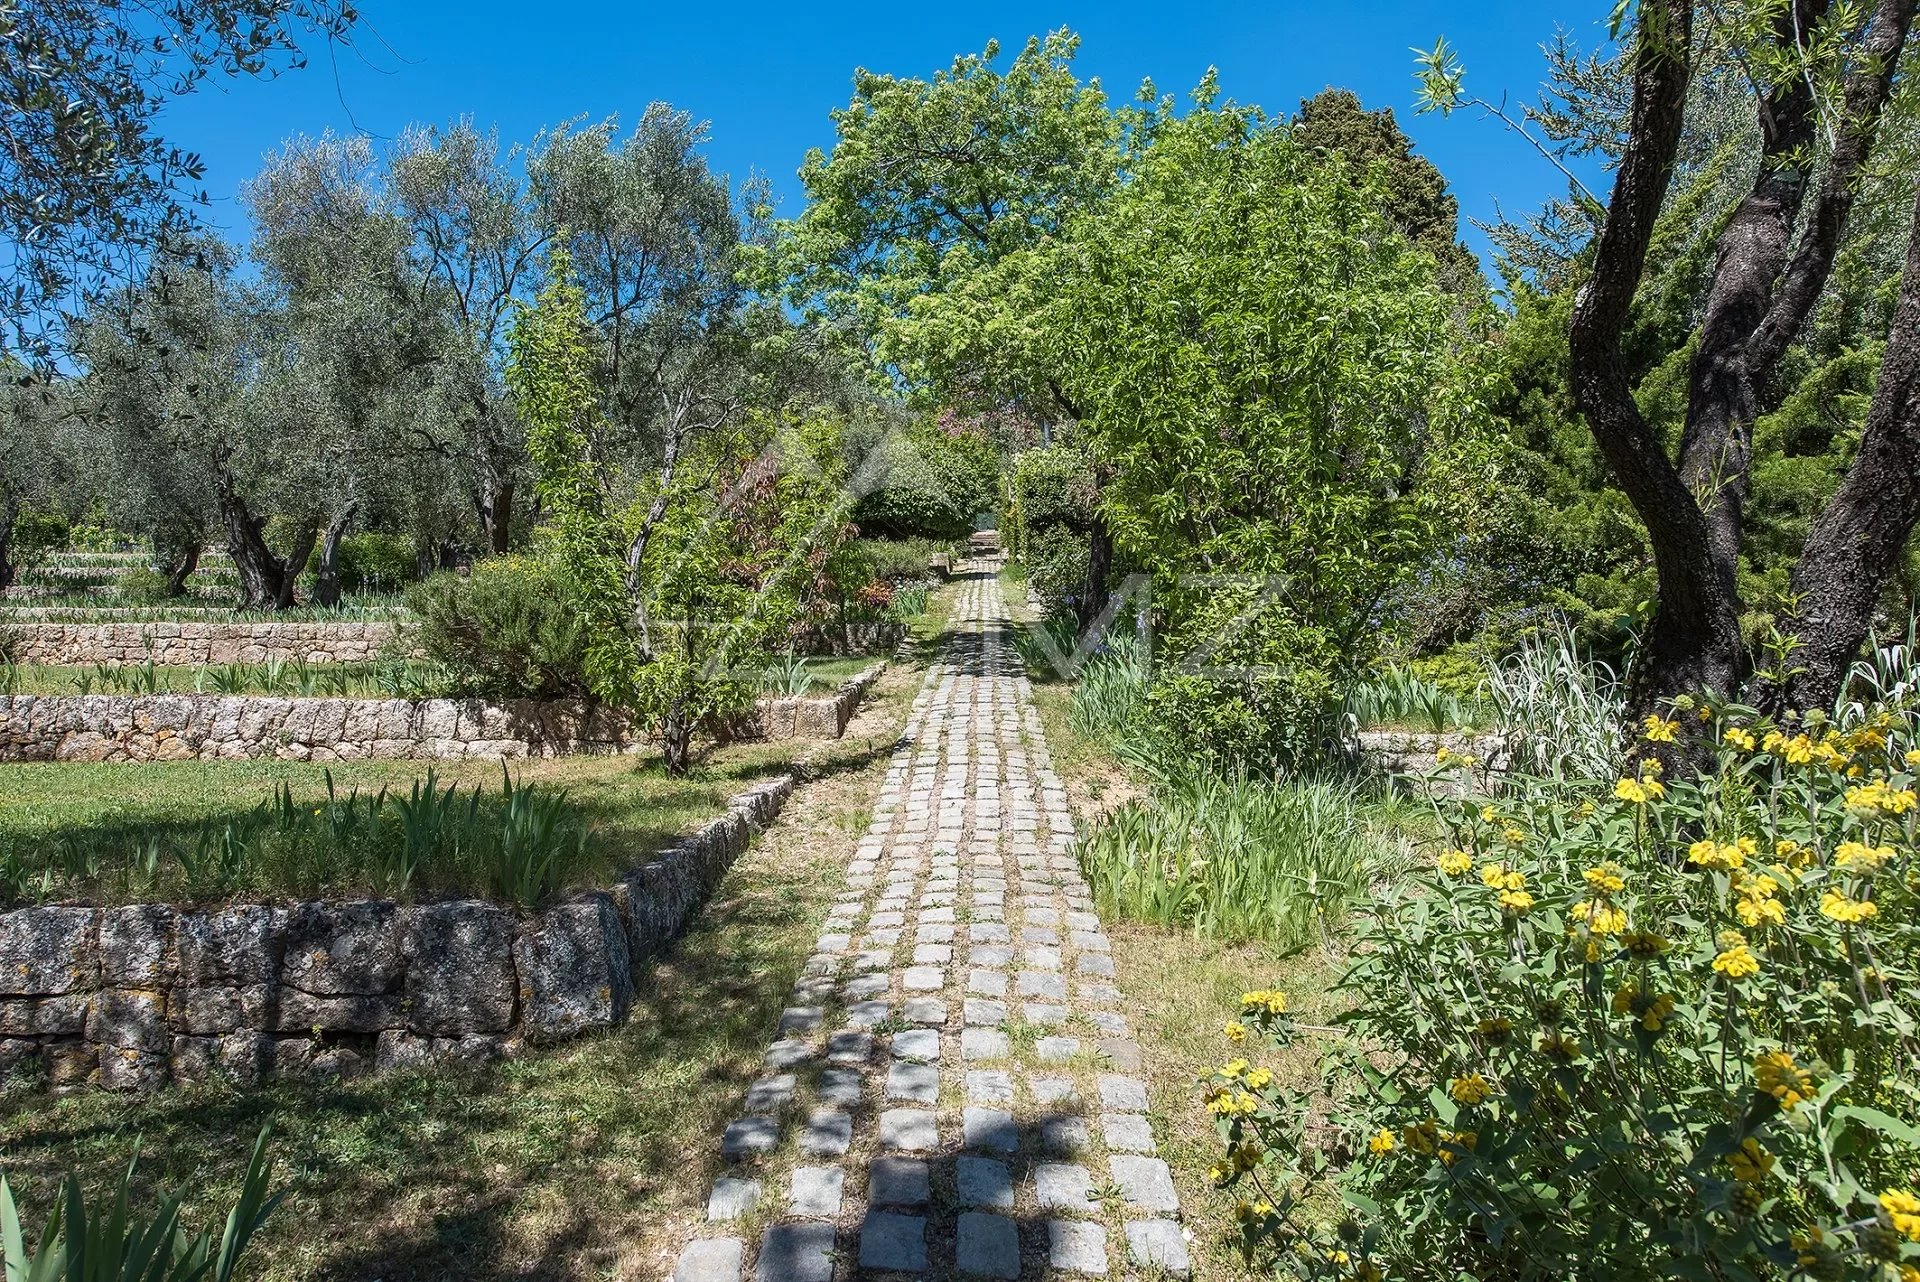 Cannes backcountry - Remarkable gardens